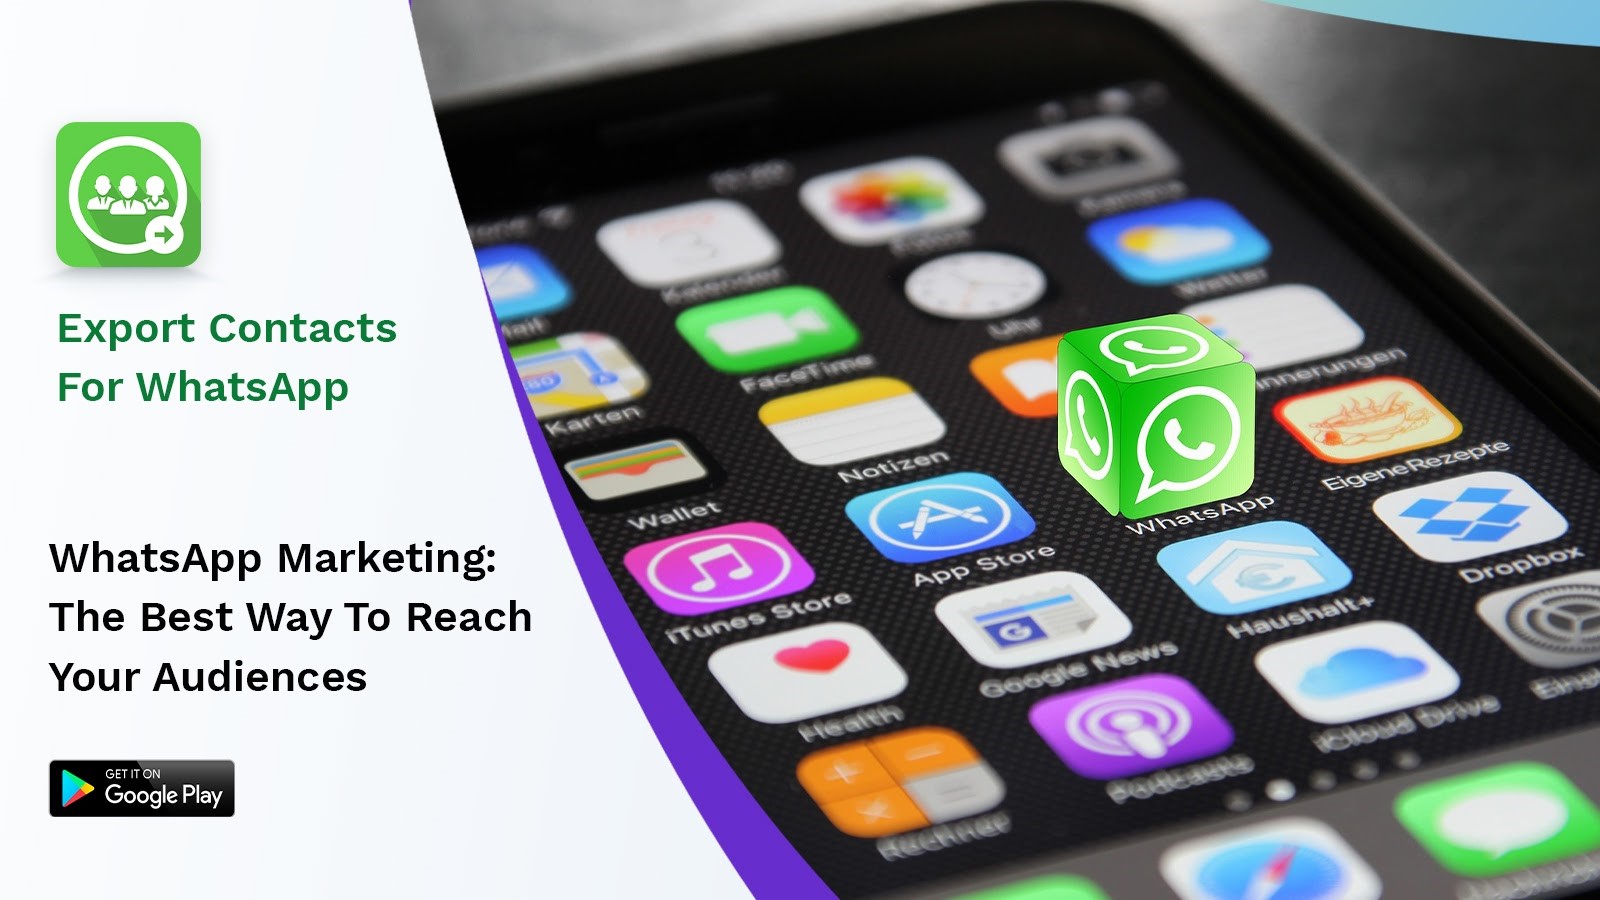 #WhatsApp Marketing: The Best Way To Reach Your Audiences